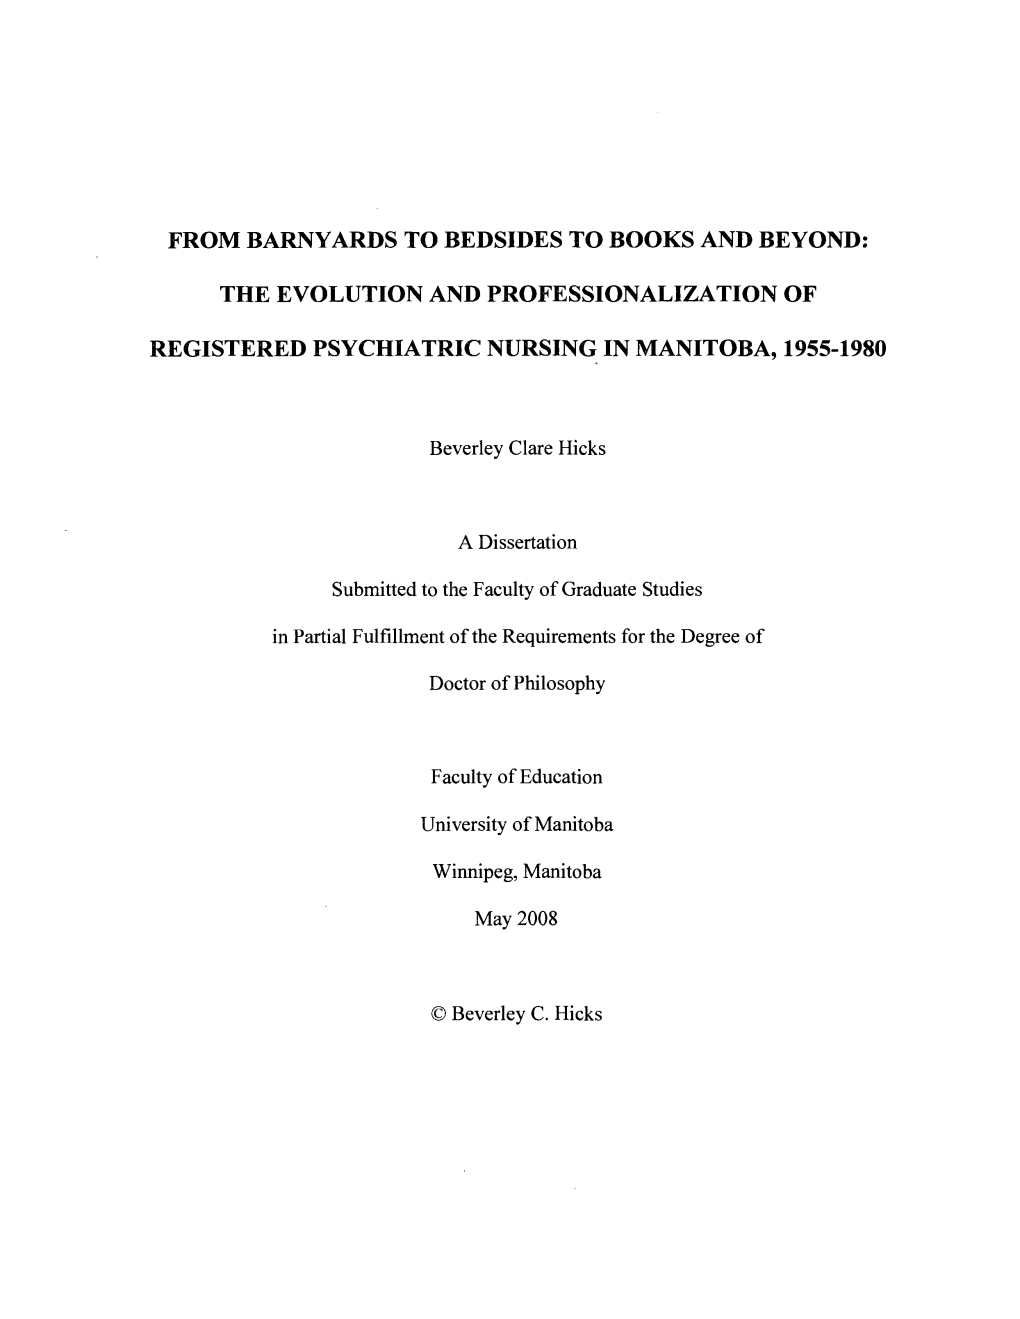 From Barnyards to Bedsides to Books and Beyond: the Evolution and Professionalization of Registered Psychiatric Nursing in Manitoba, 1955-1980